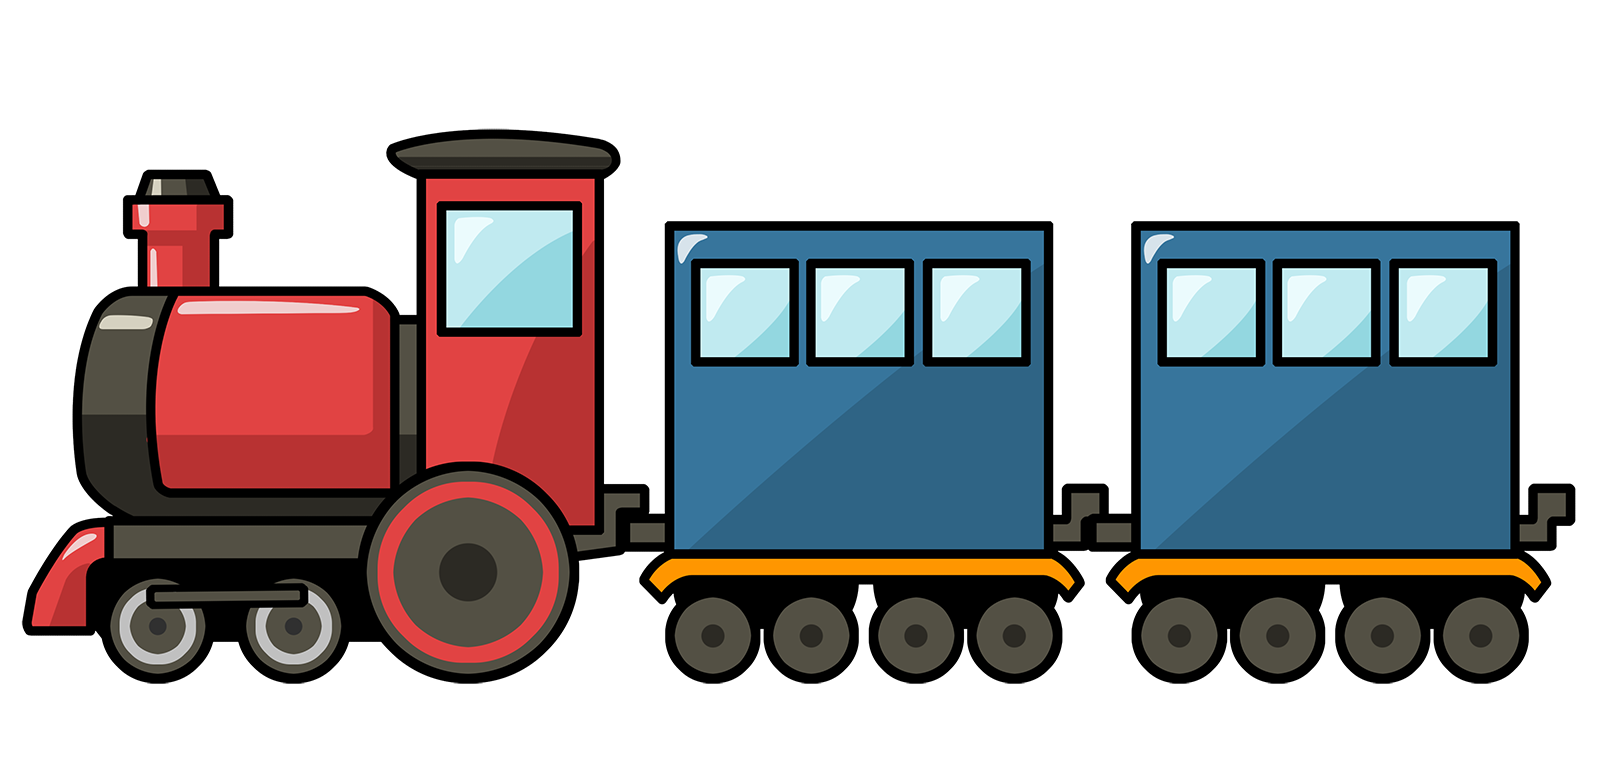 Cartoon Images Of Trains - Clipart library